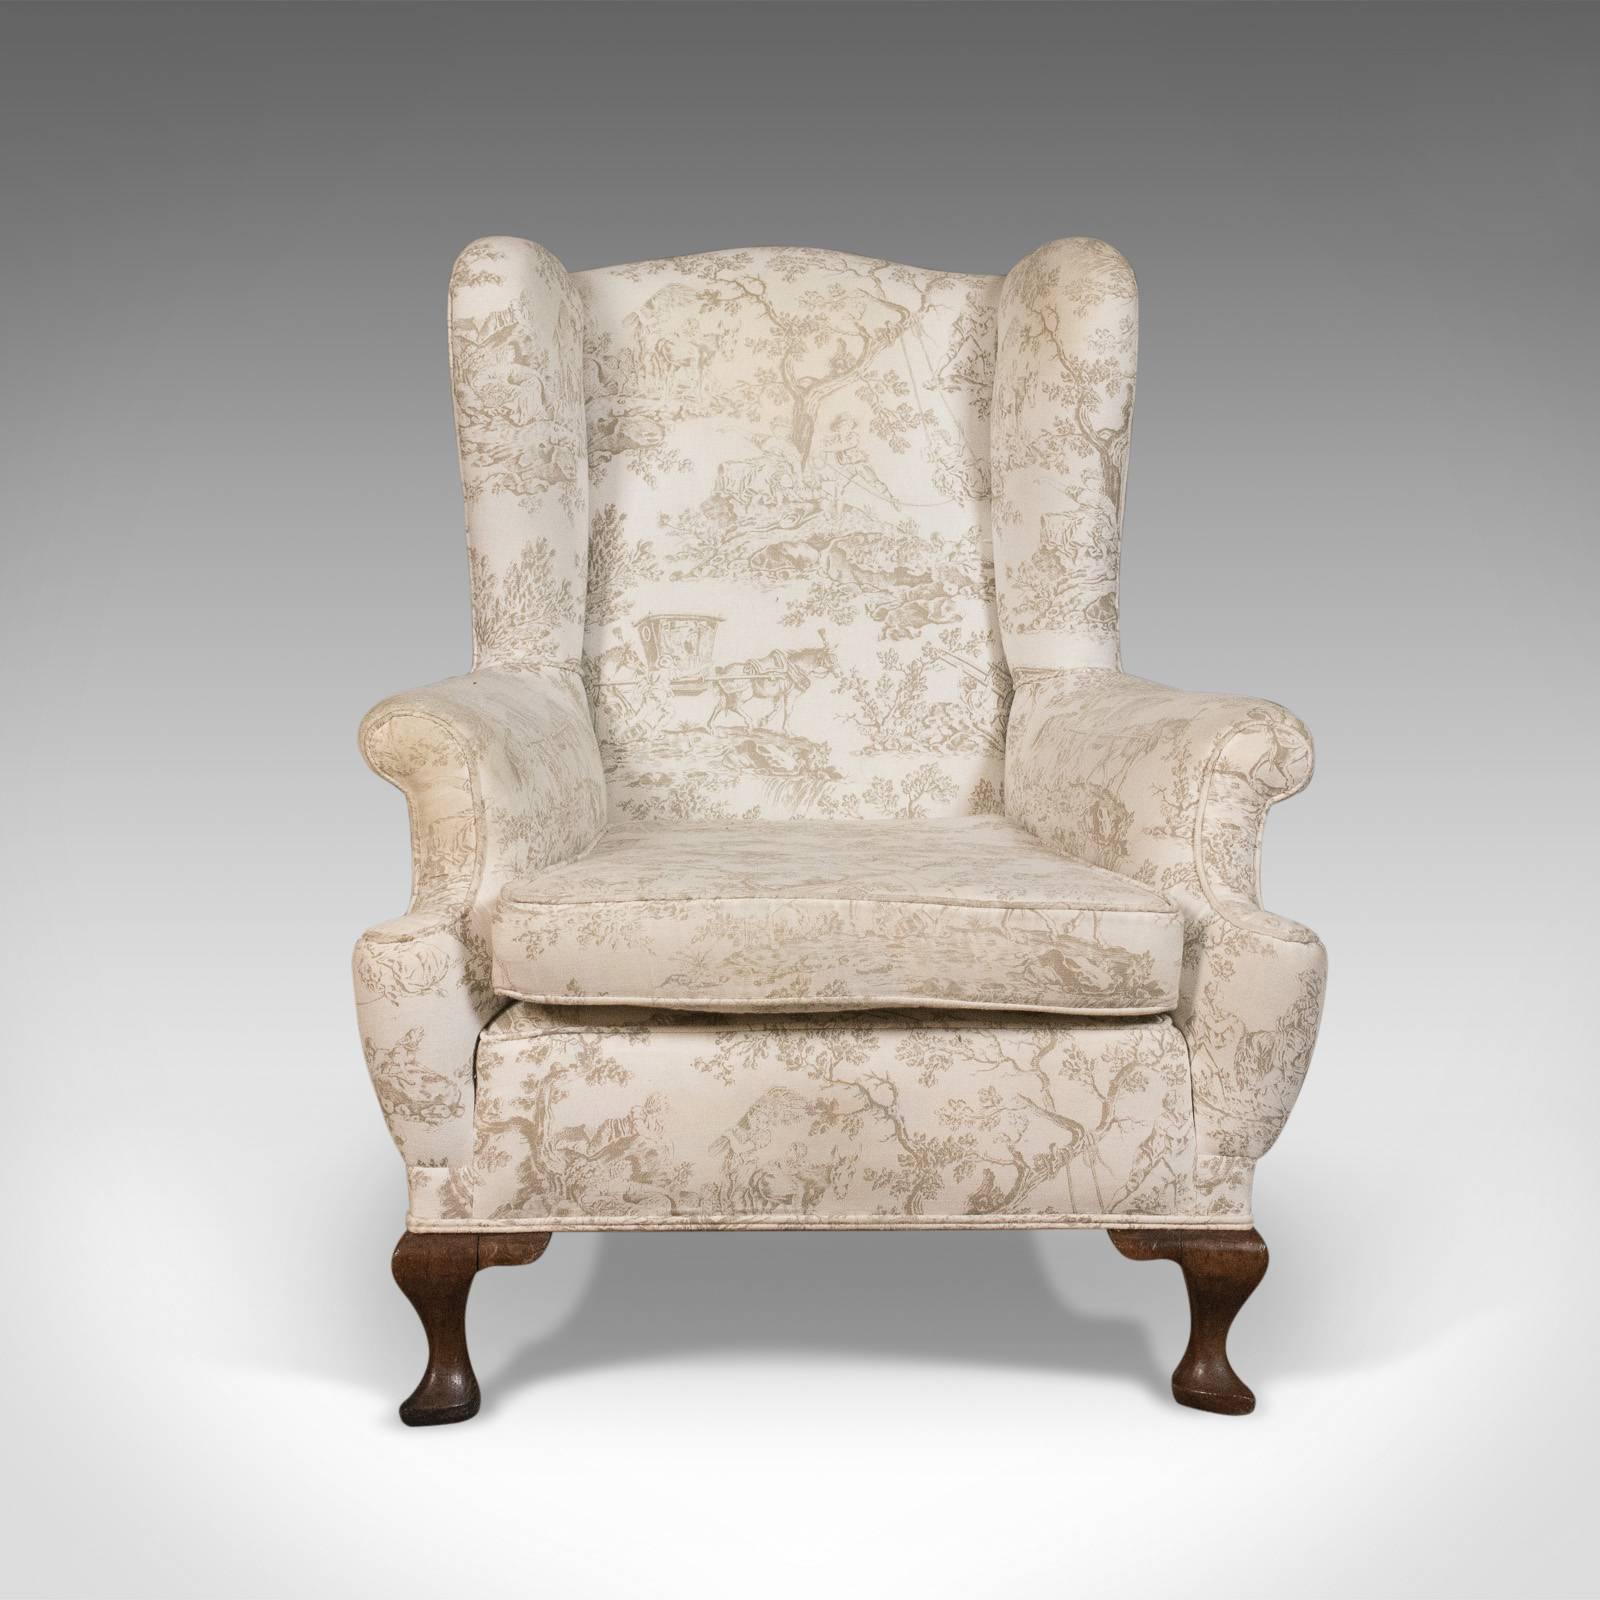 This is an antique wing back chair, an English Victorian armchair with mahogany frame dating to circa 1900.

Classic proportions offering a broad and comfortable seat
Solidly constructed with a heavy mahogany frame
Historically professionally